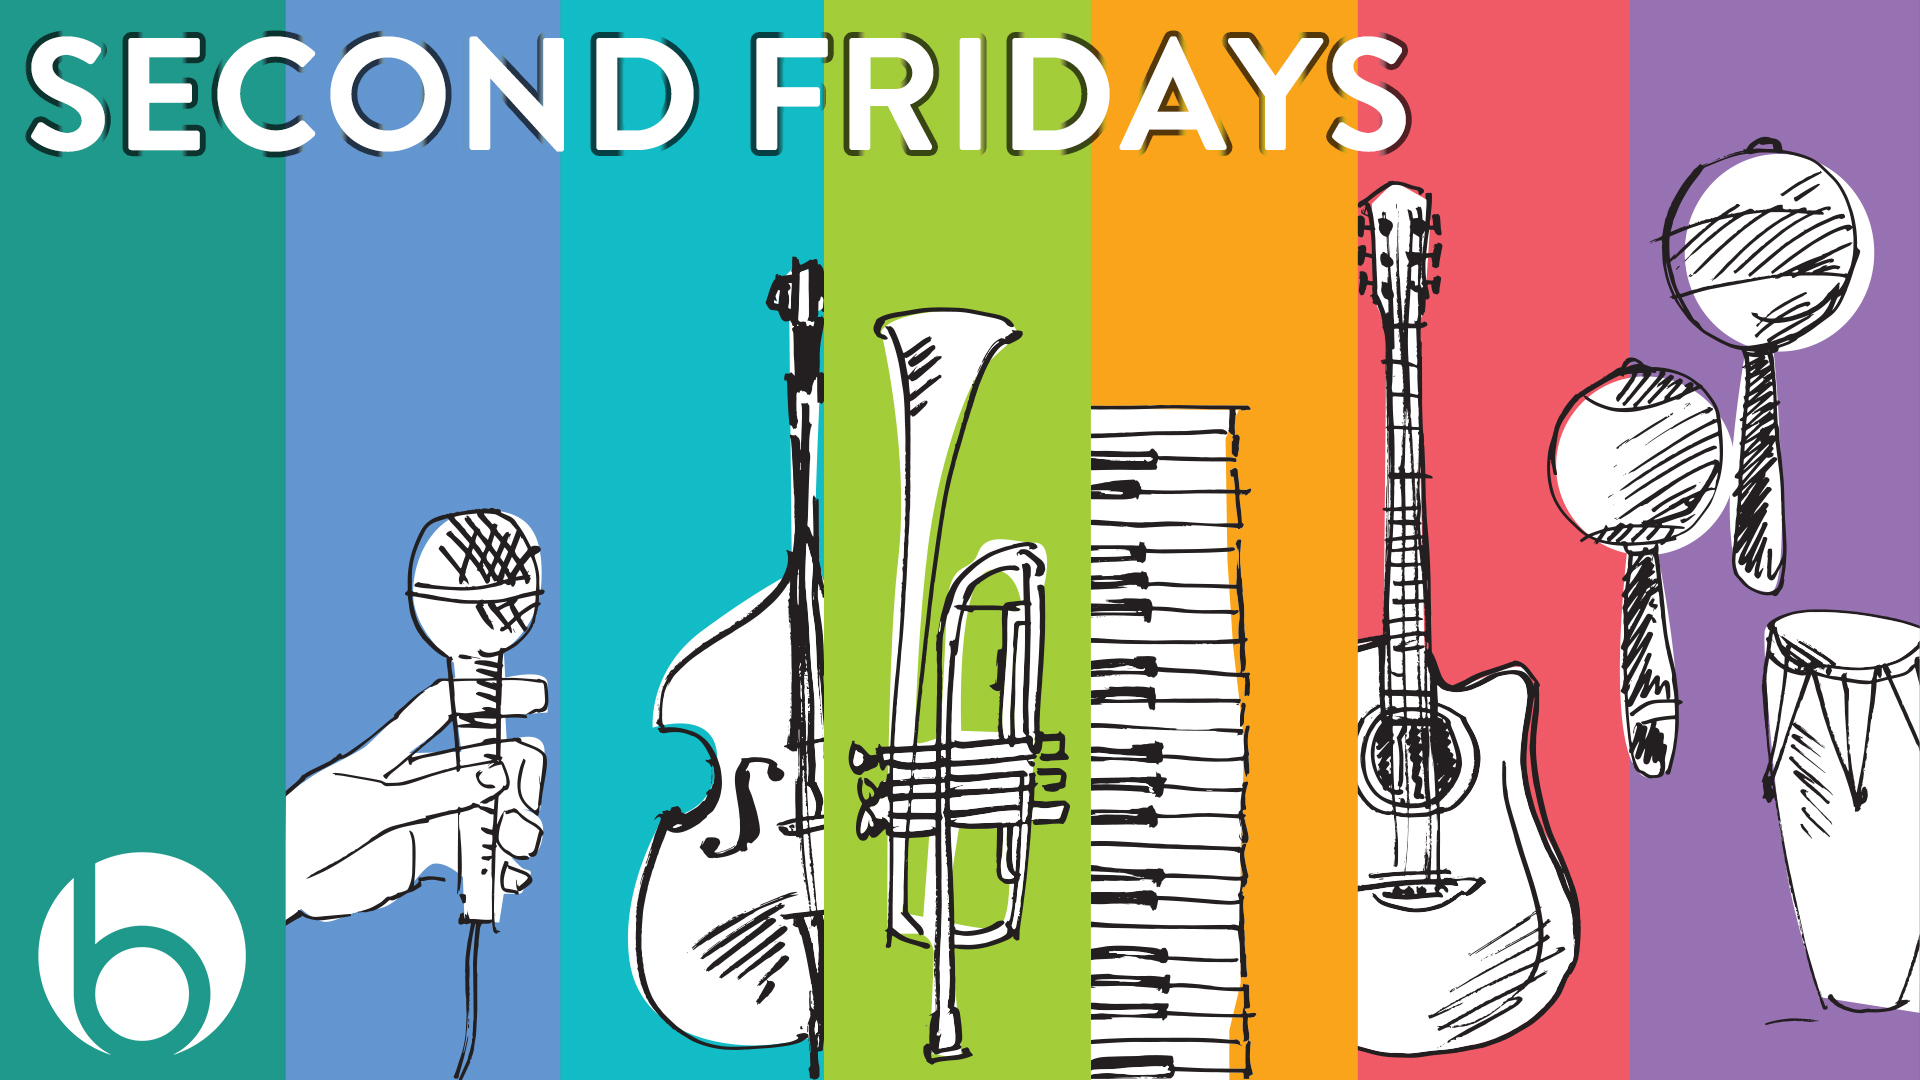 Colored stripes in background, text reading Second Fridays, black and white drawings of musical instruments